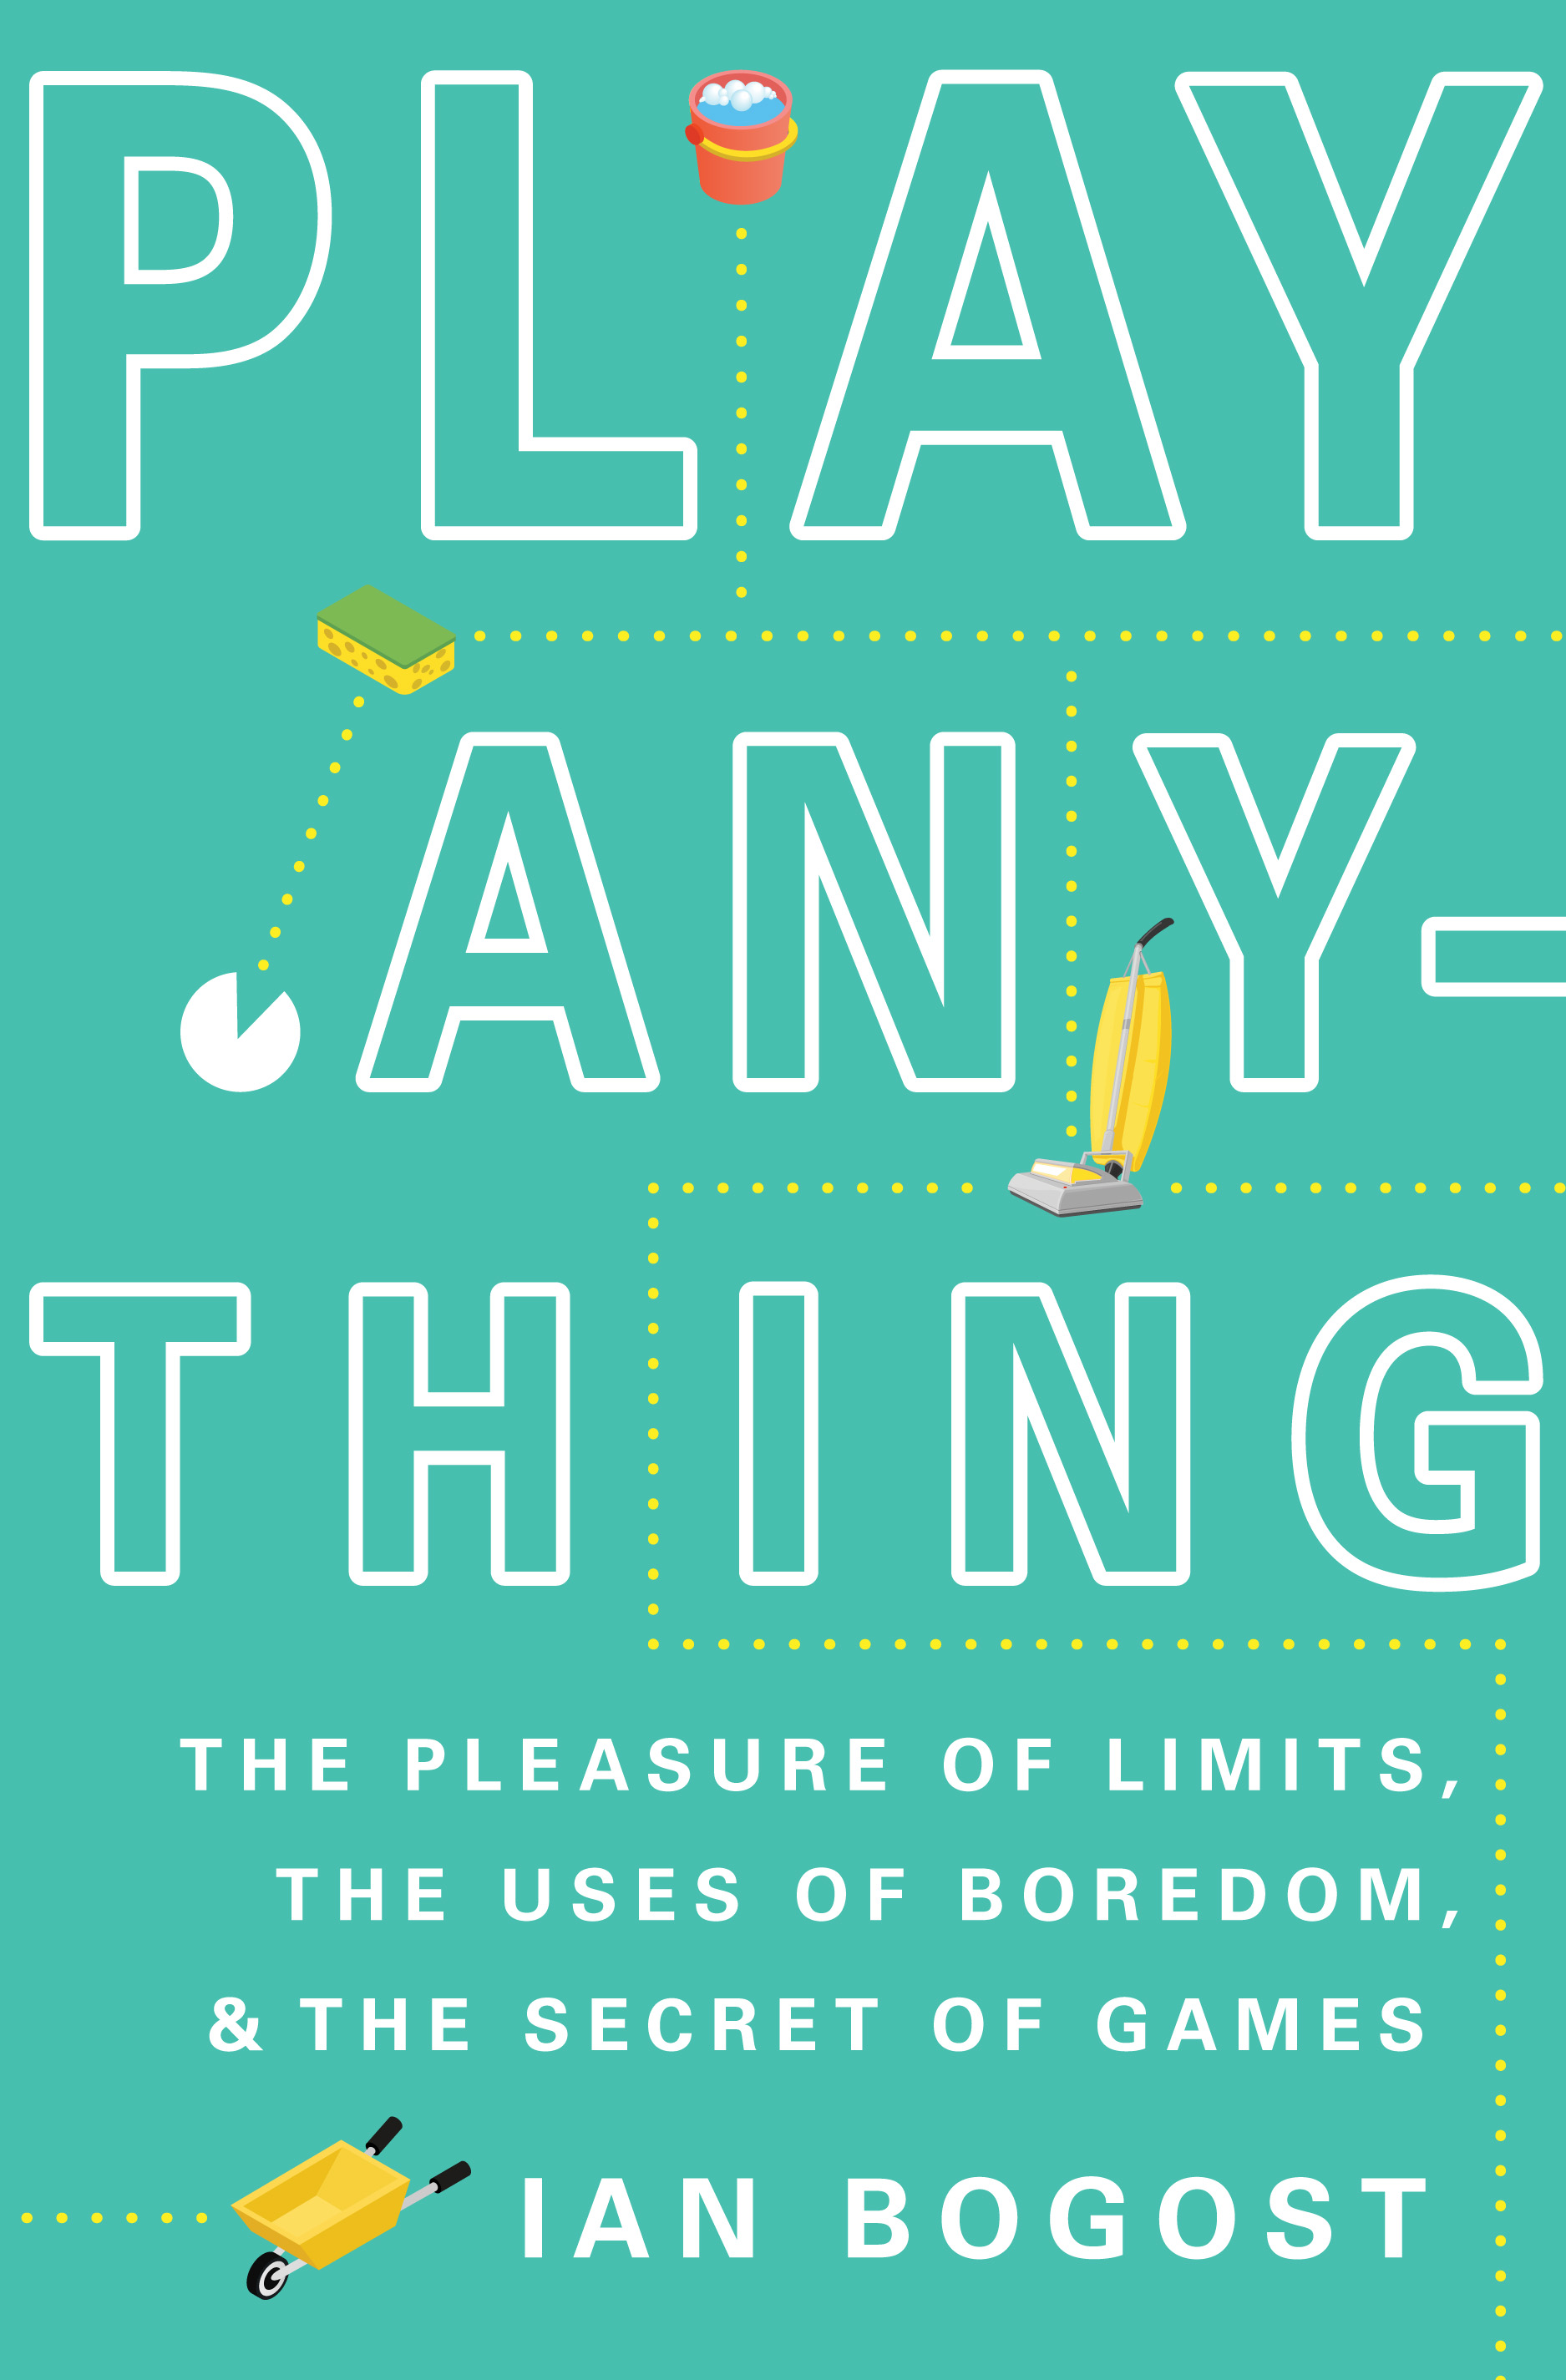 bogost-play-anything-high-res